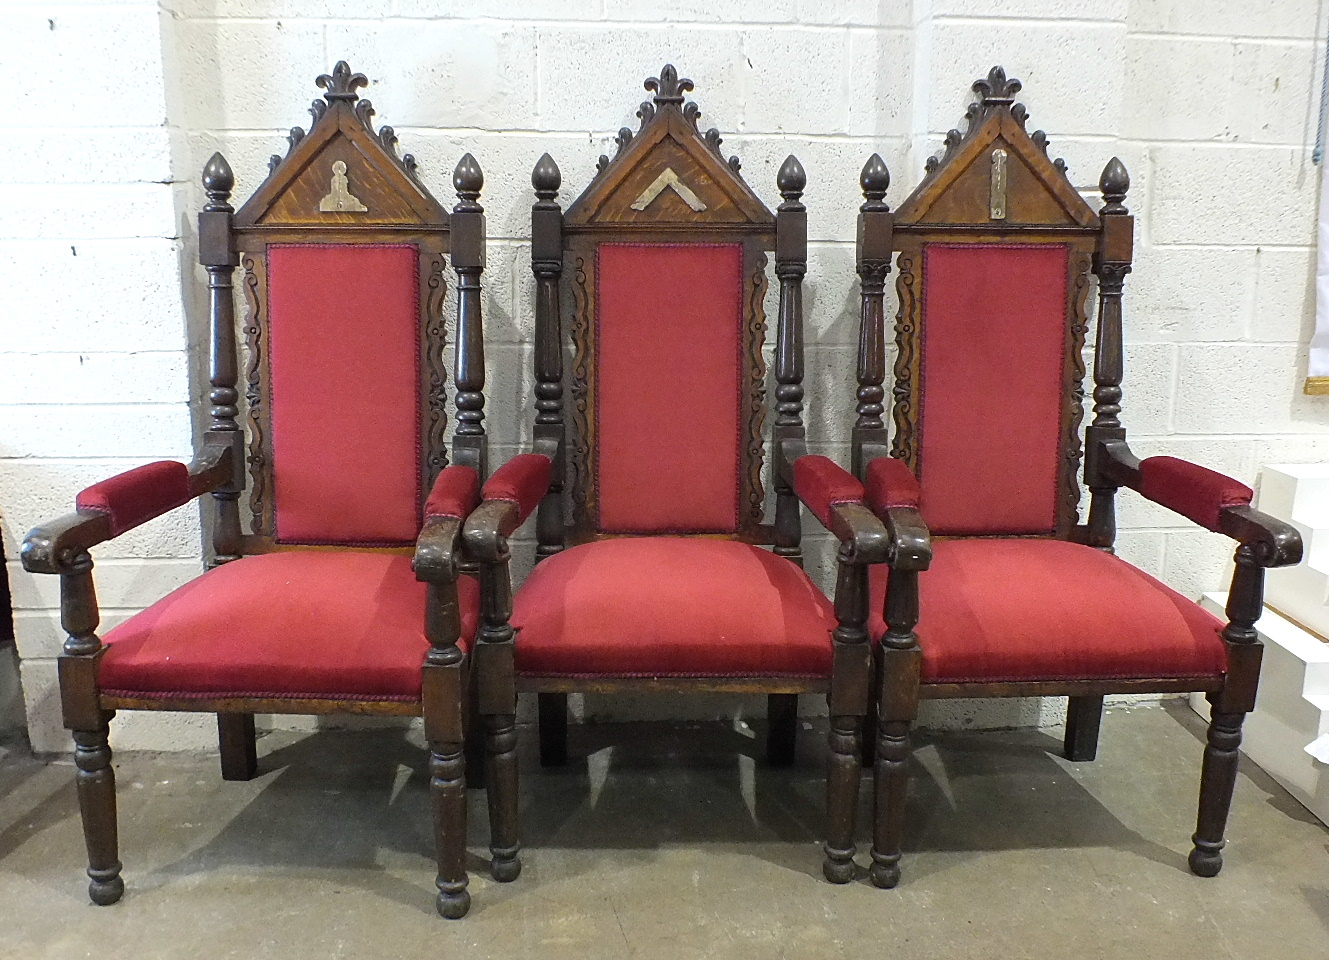 A Masonic WM's upholstered oak chair by Kenning, Manufacturer, London, together with Senior and